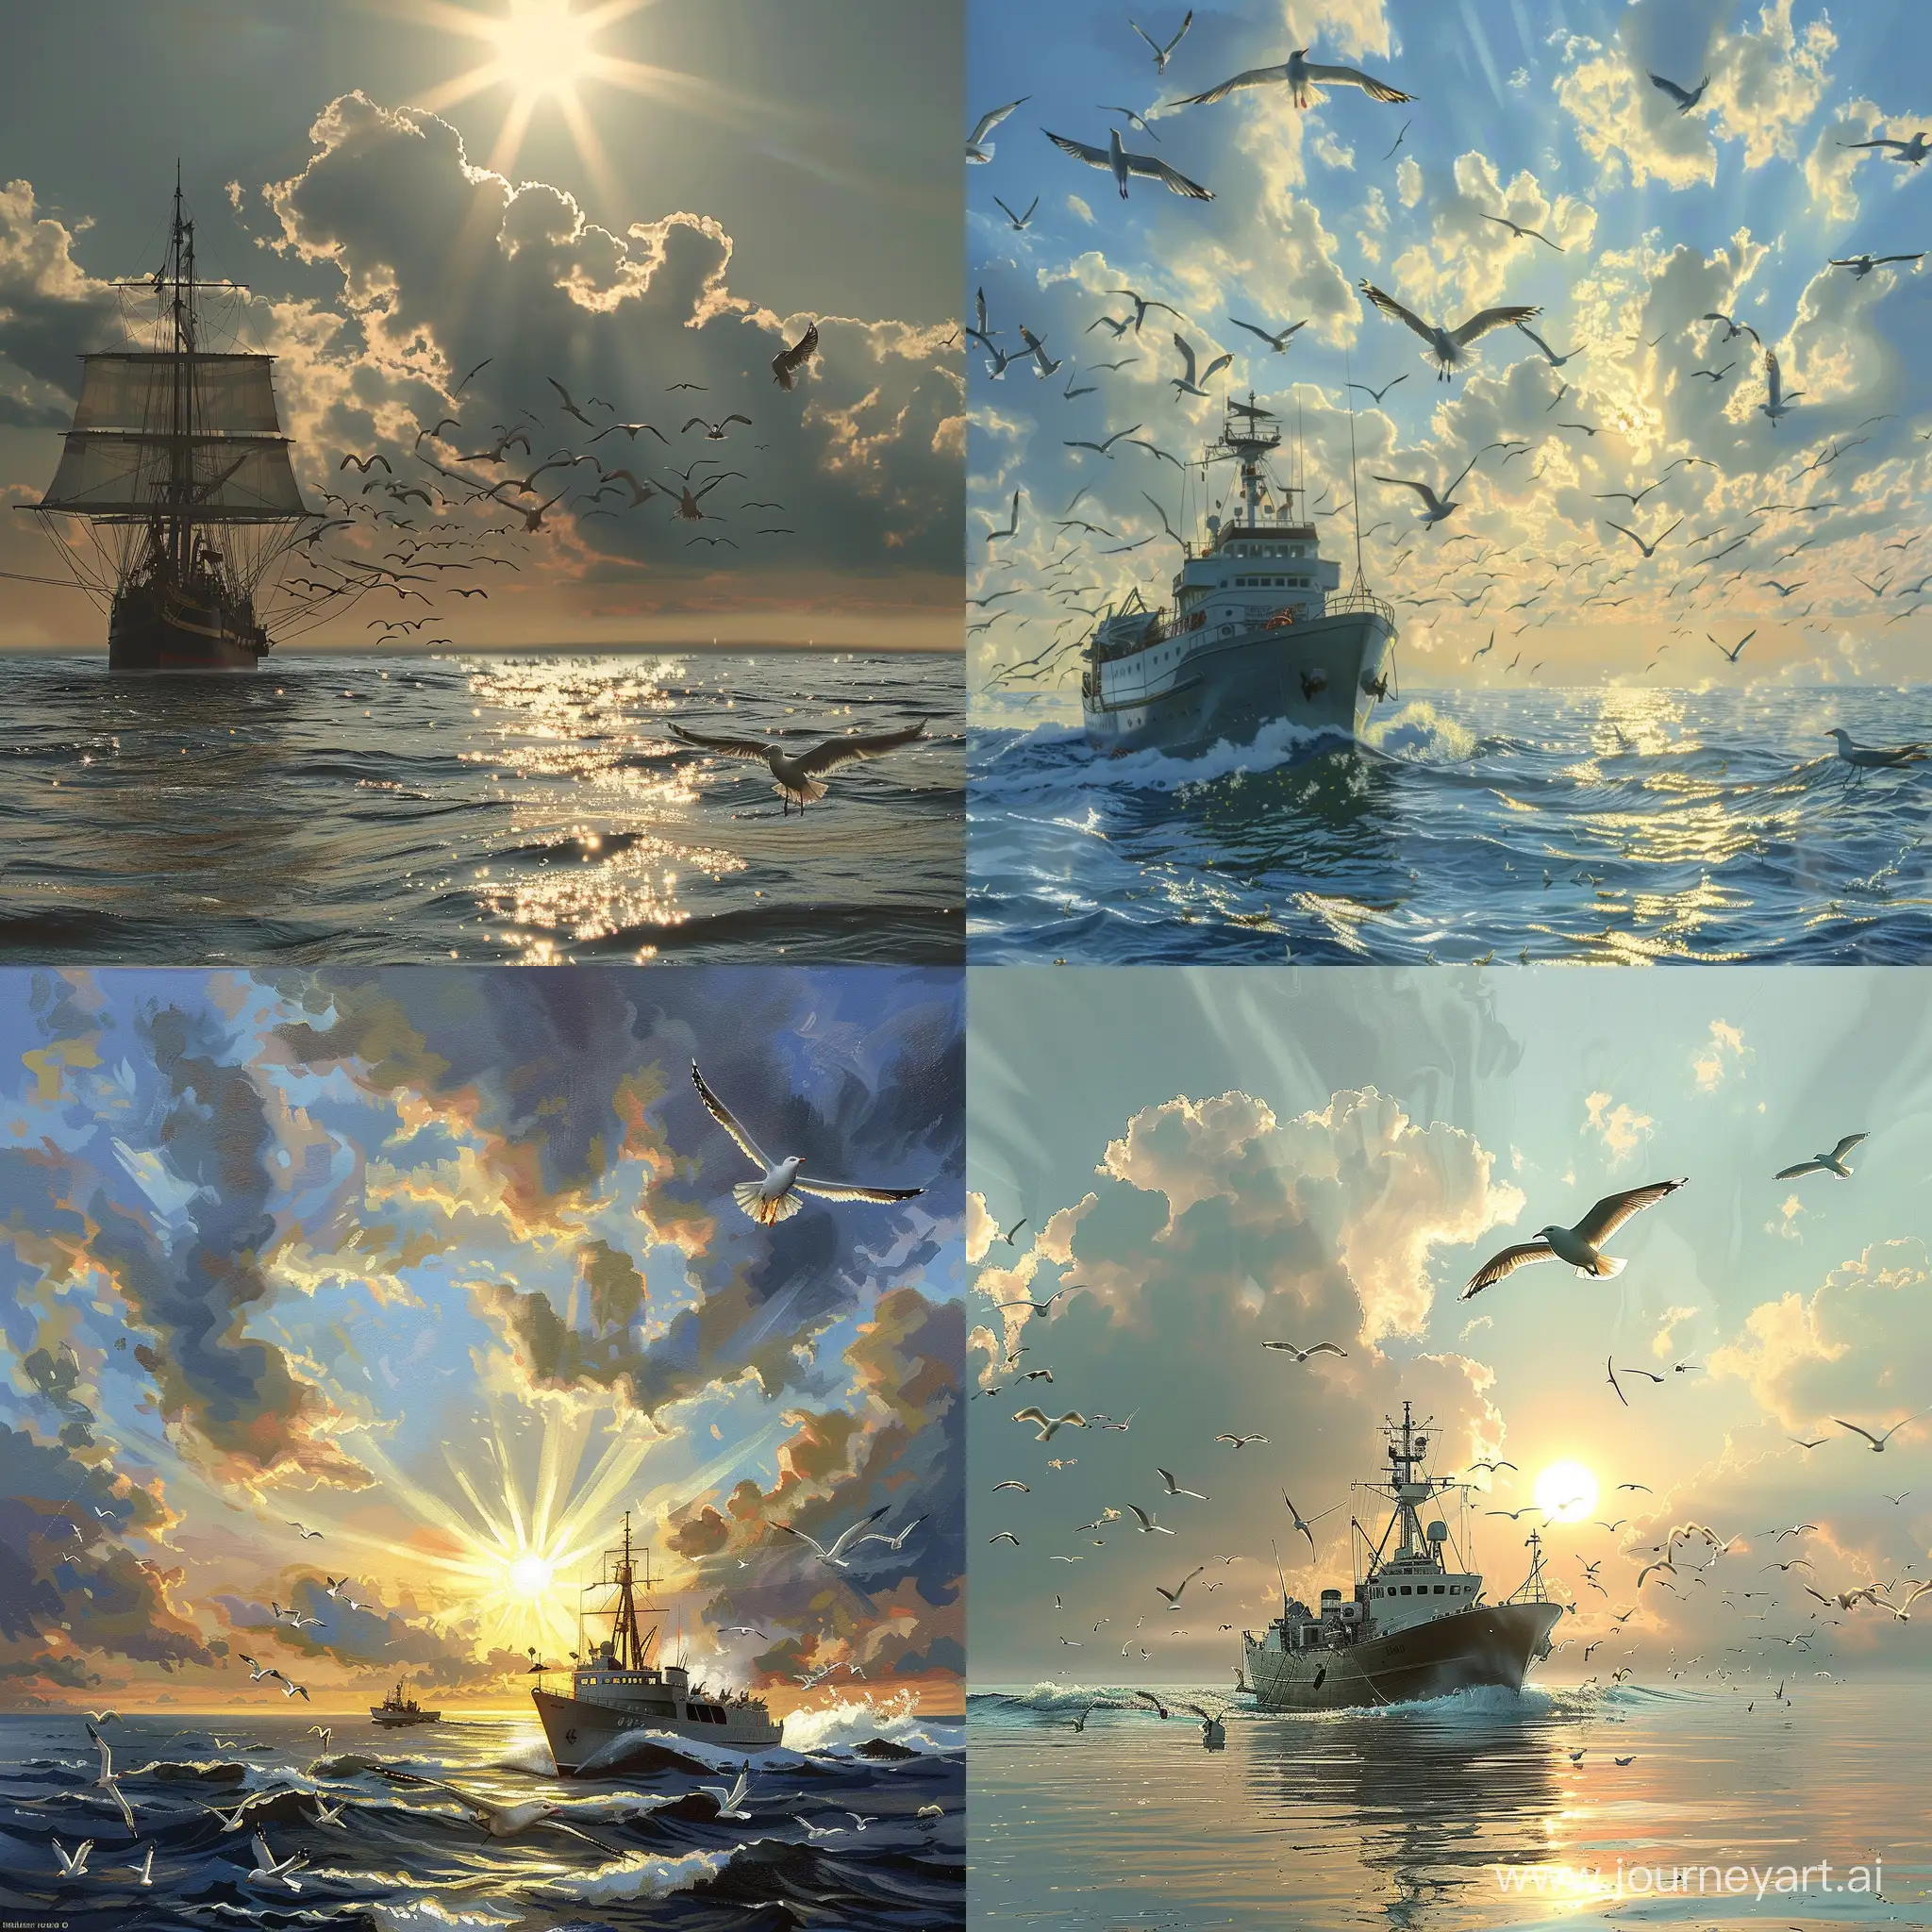 Tranquil-Morning-at-Sea-Frigate-Sailing-under-Sunlit-Sky-with-Seagulls